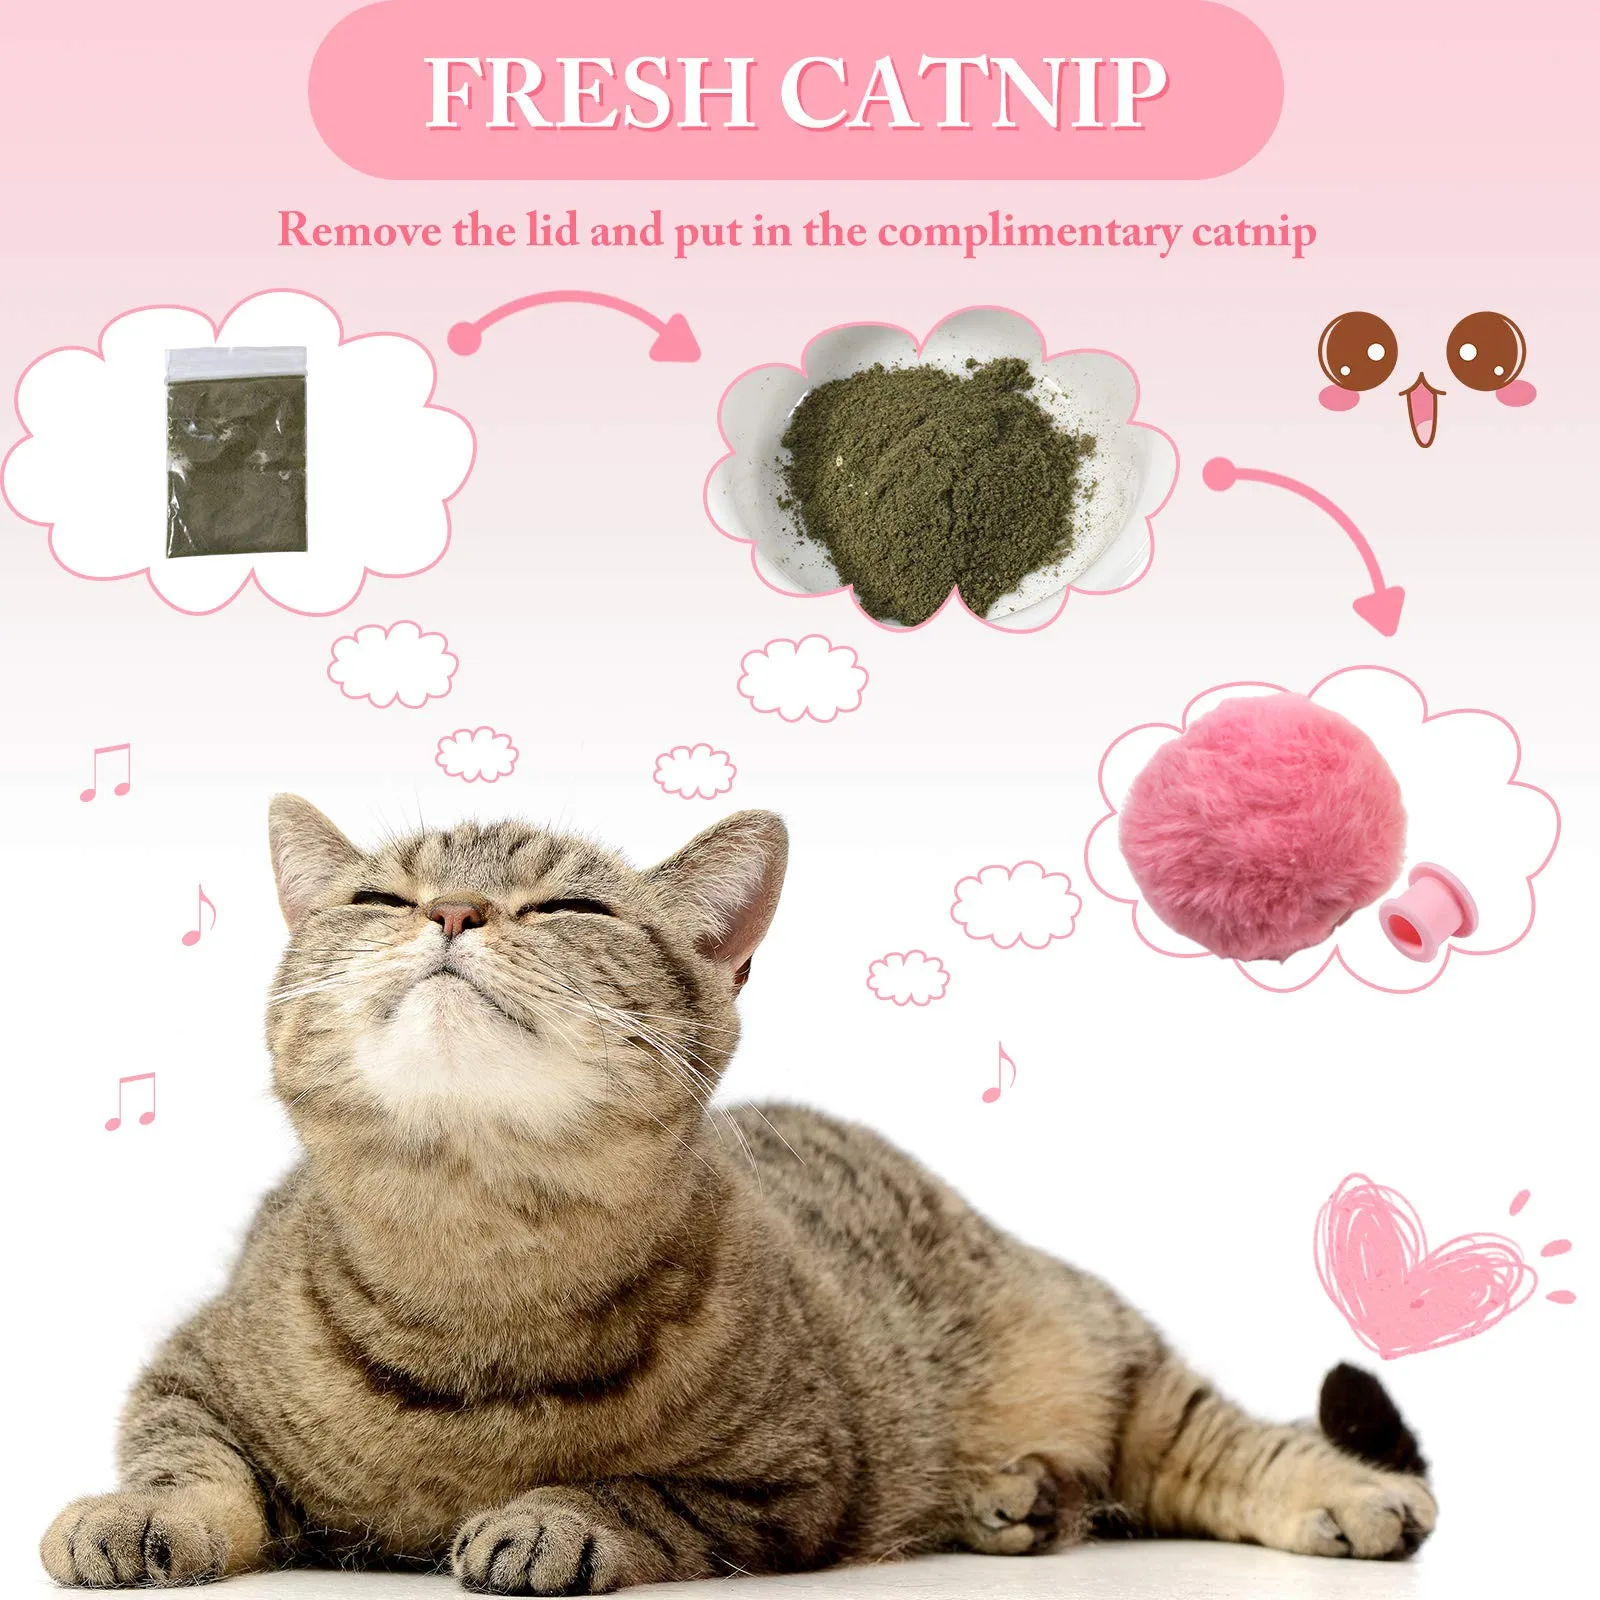 Interactive Cat Ball Toys Plush Electric Catnip Sound Cat Selfplaying Kitten Toy Pet Ball Pet Supplies Products Toys for Cats